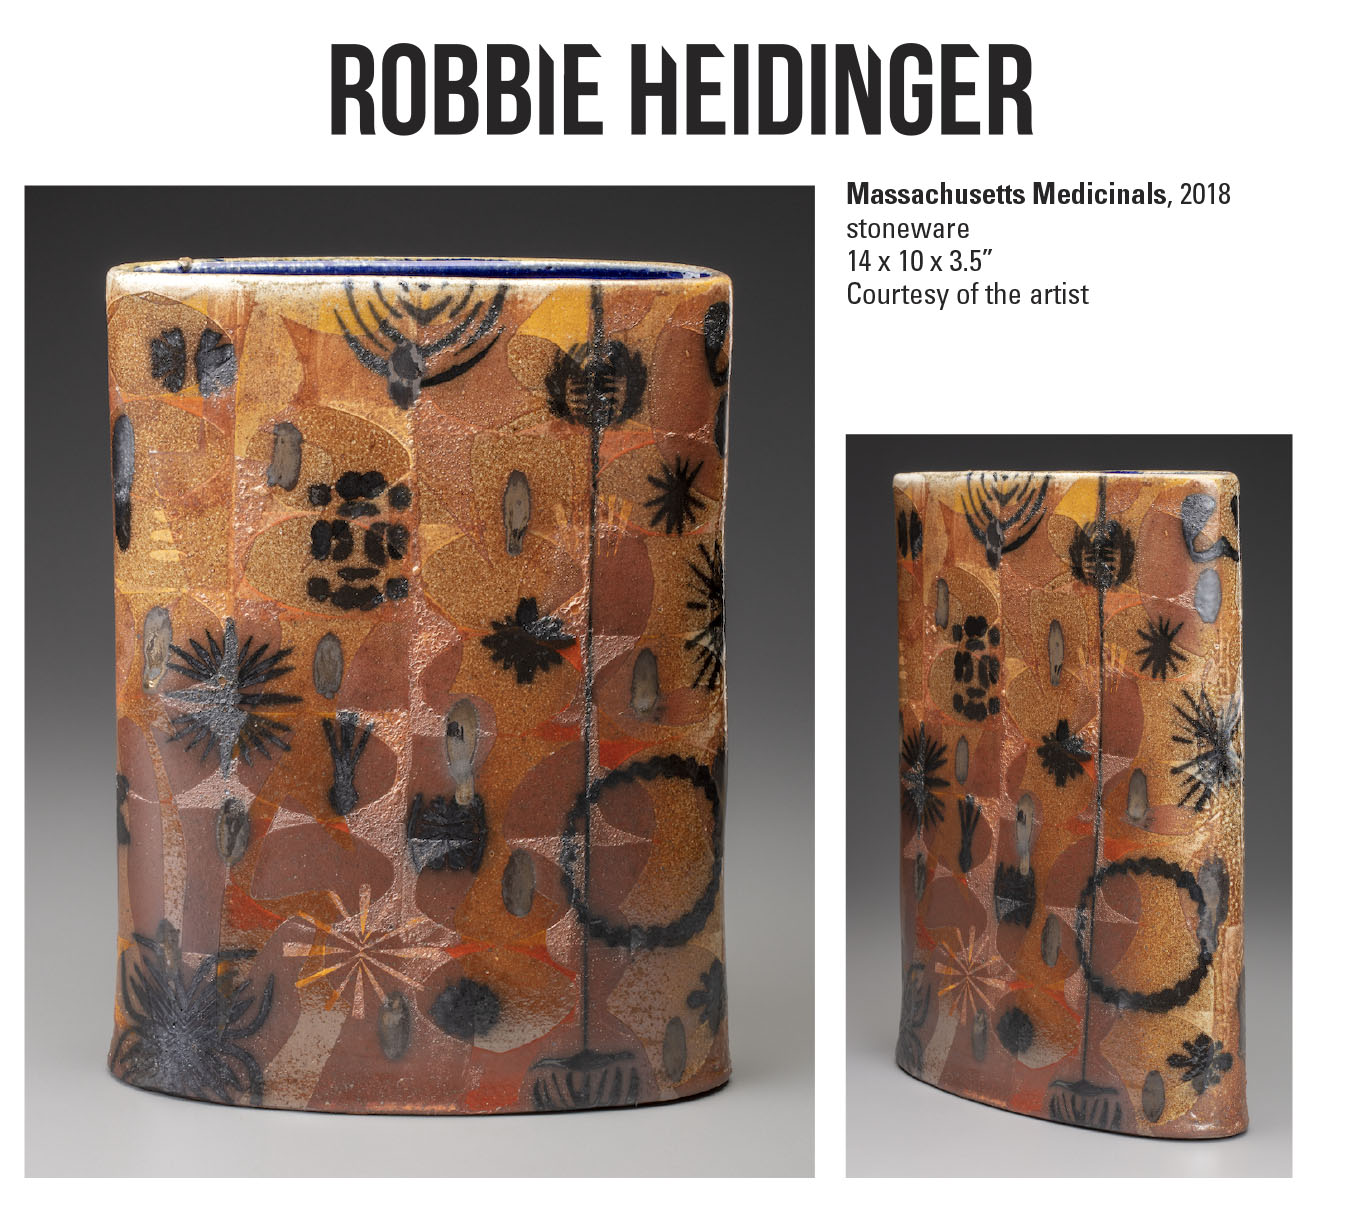 Robbie Heidinger, Massachusetts Medicinals, 2018. Stoneware 14 x 10 x 3.5” Courtesy of the artist. A cylindrical sculpture with various shapes and patterns in orange, black, and light yellow